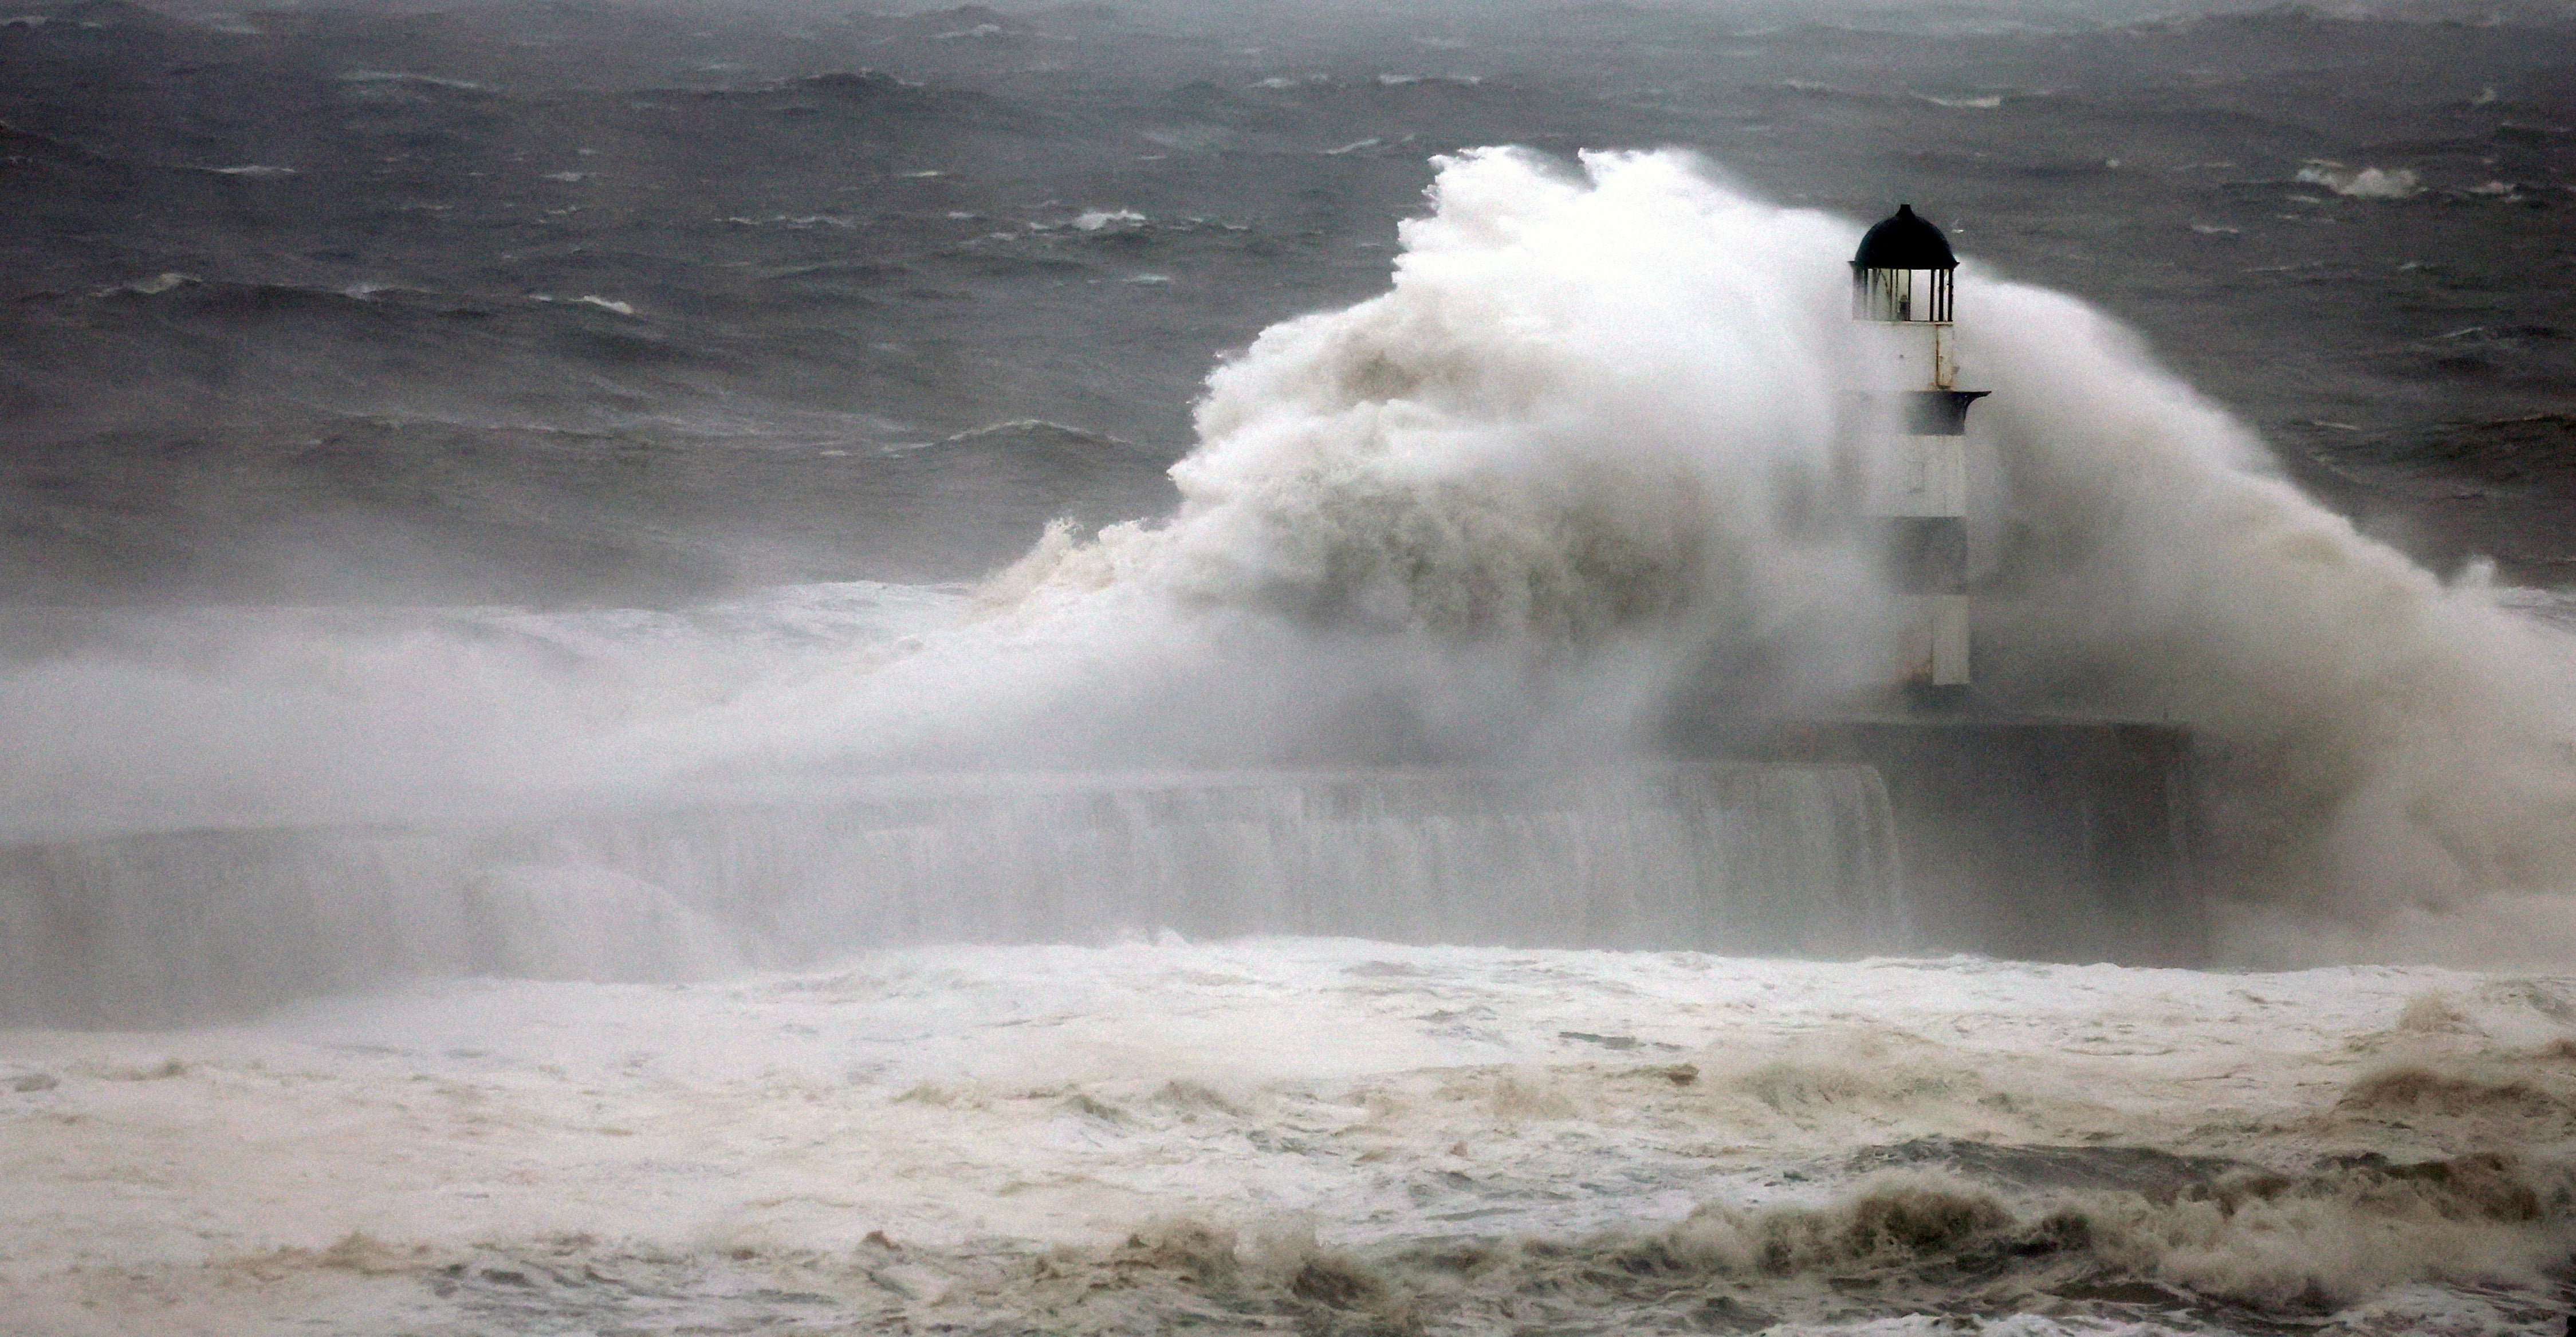 Waves crash against Seaham Lighthouse in County Durham during Storm Babet